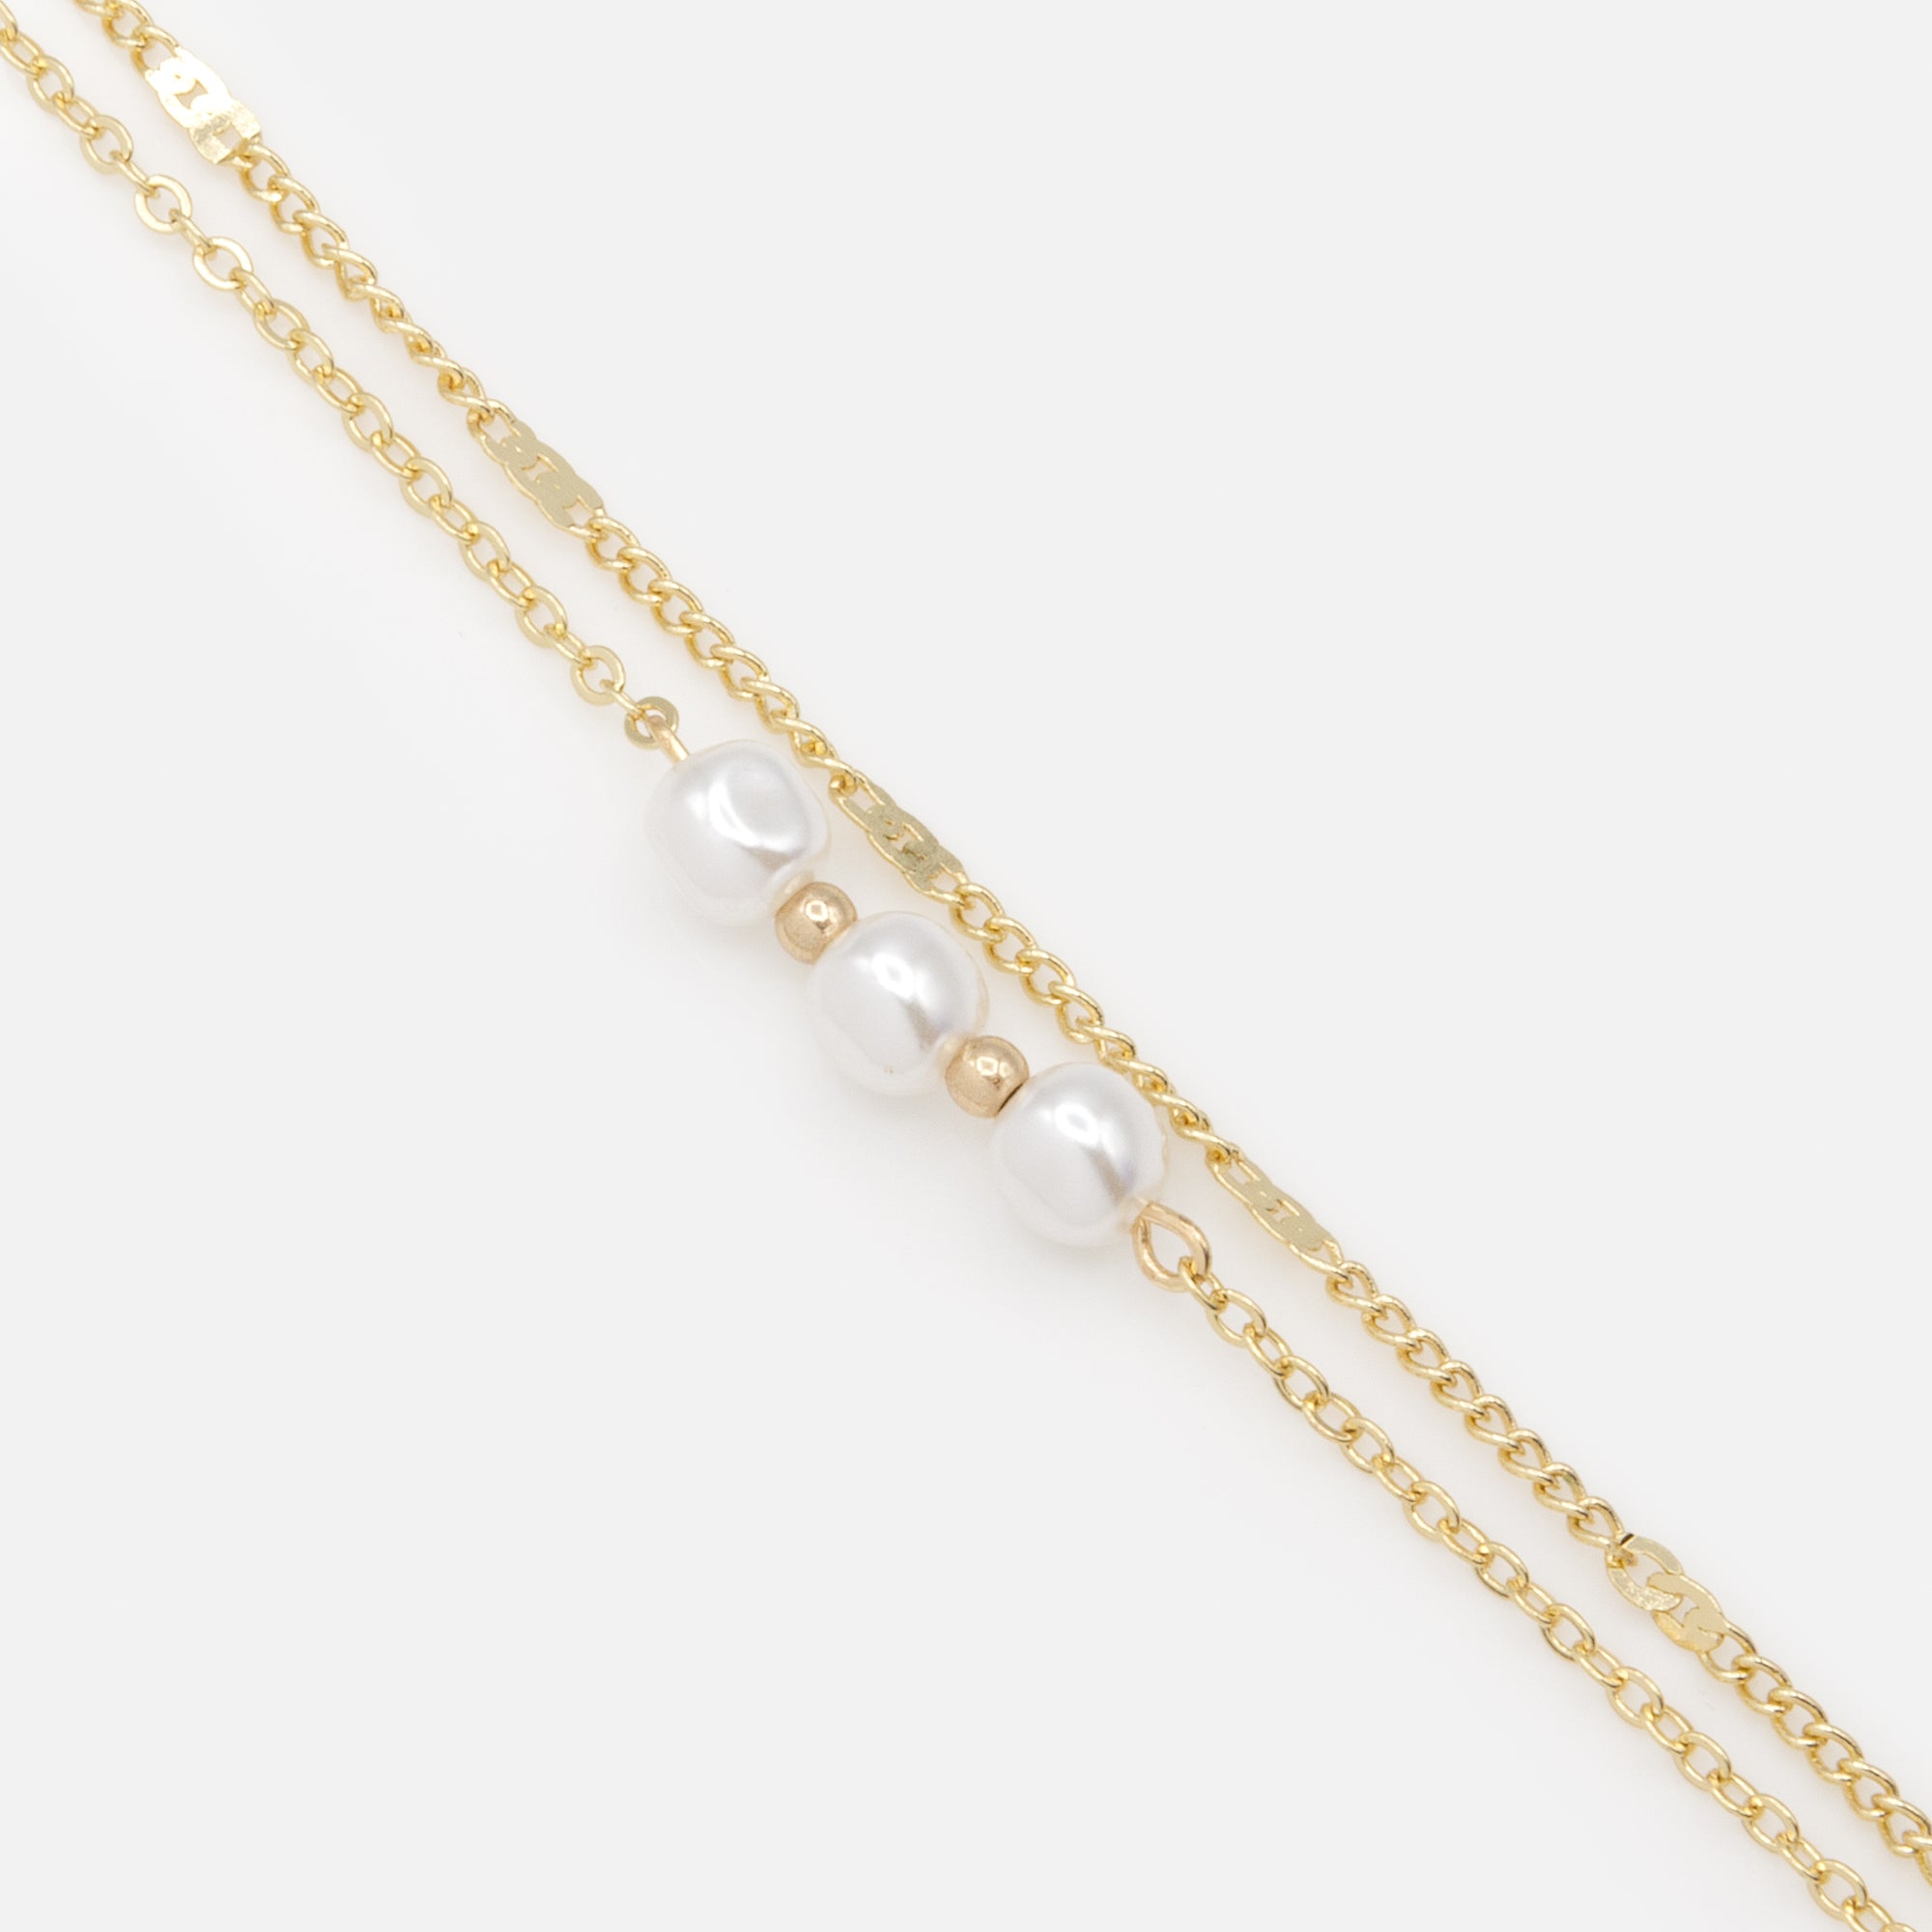 Golden double chain bracelet with pearls and flat inserts